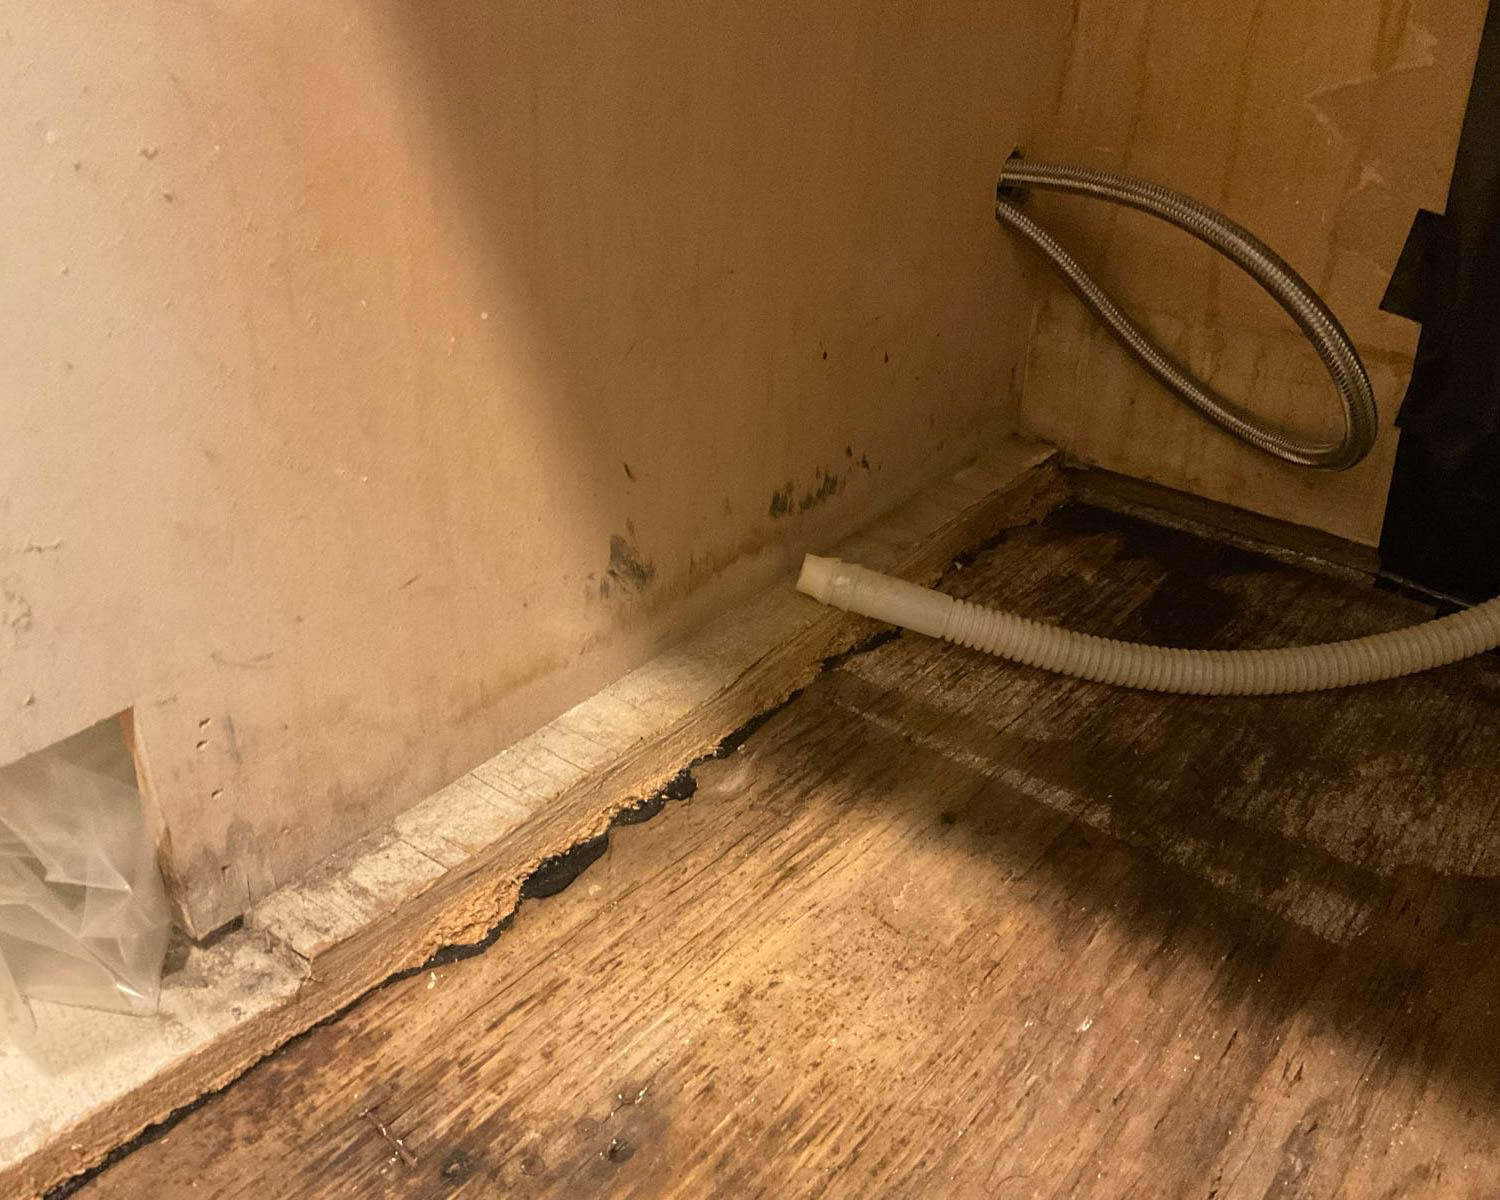 If your home has water damage, don't wait until the situation worsens. Call our team at SERVPRO of K Servpro of Kansas City Midtown Kansas City (816)895-8890